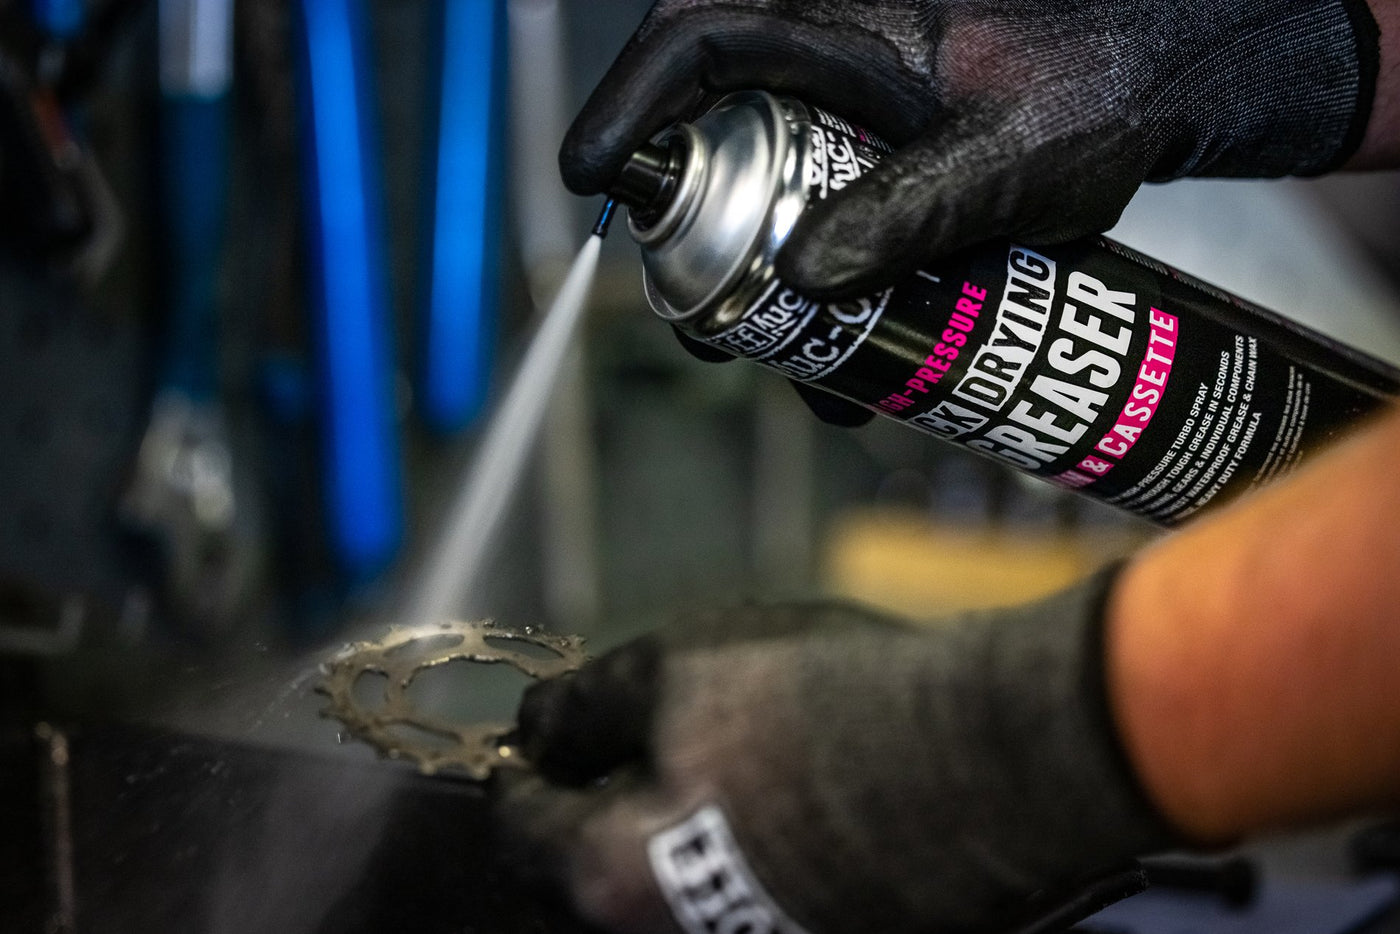 Muc-Off High Pressure Quick Drying Degreaser